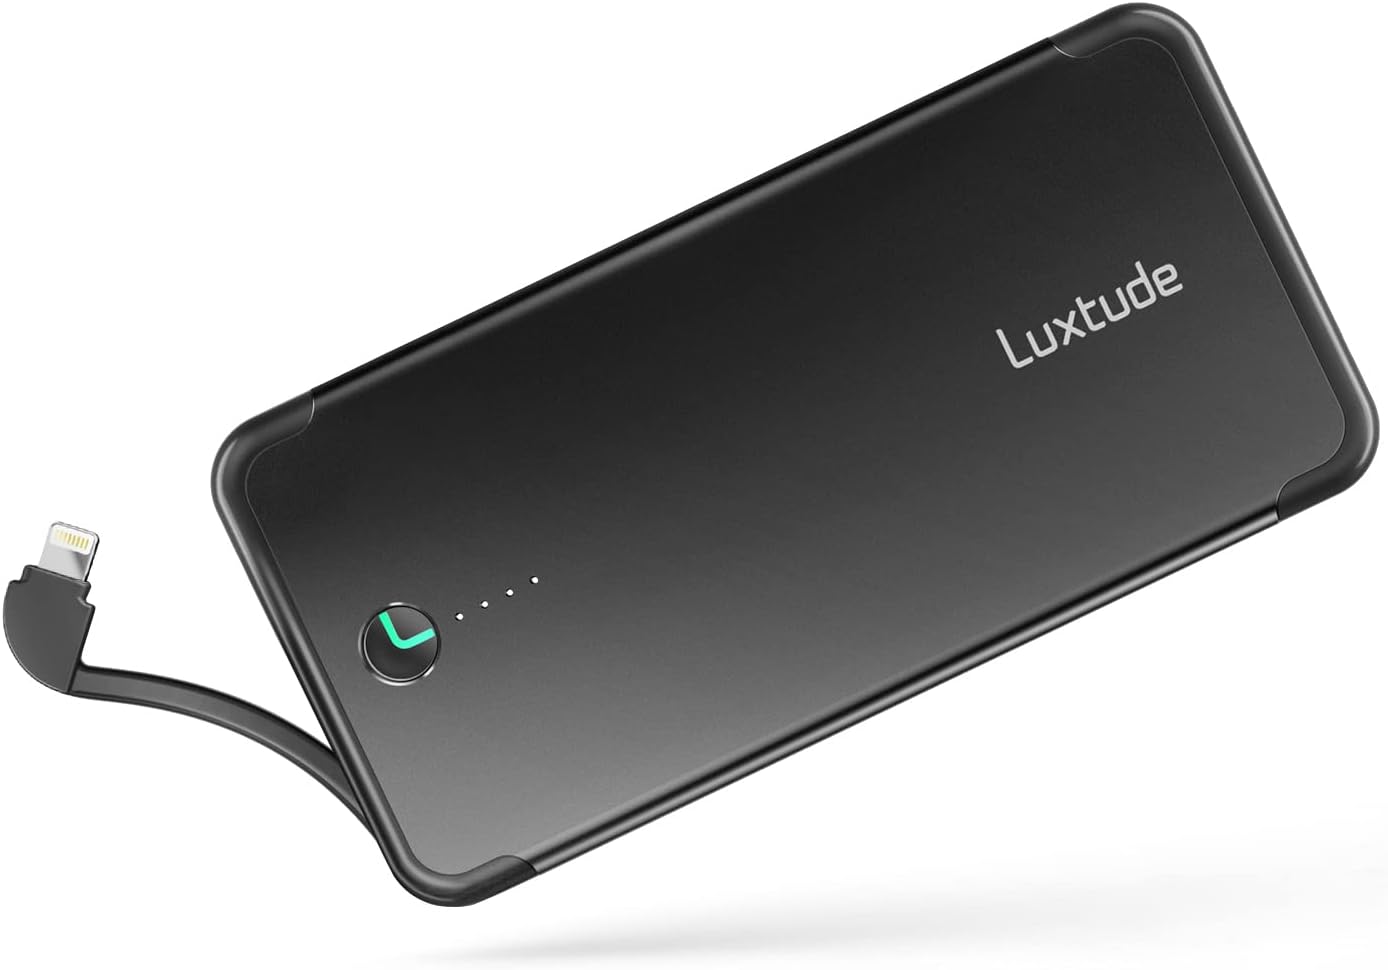 Luxtude 10000mAh Portable Charger for iPhone Built-in [...]